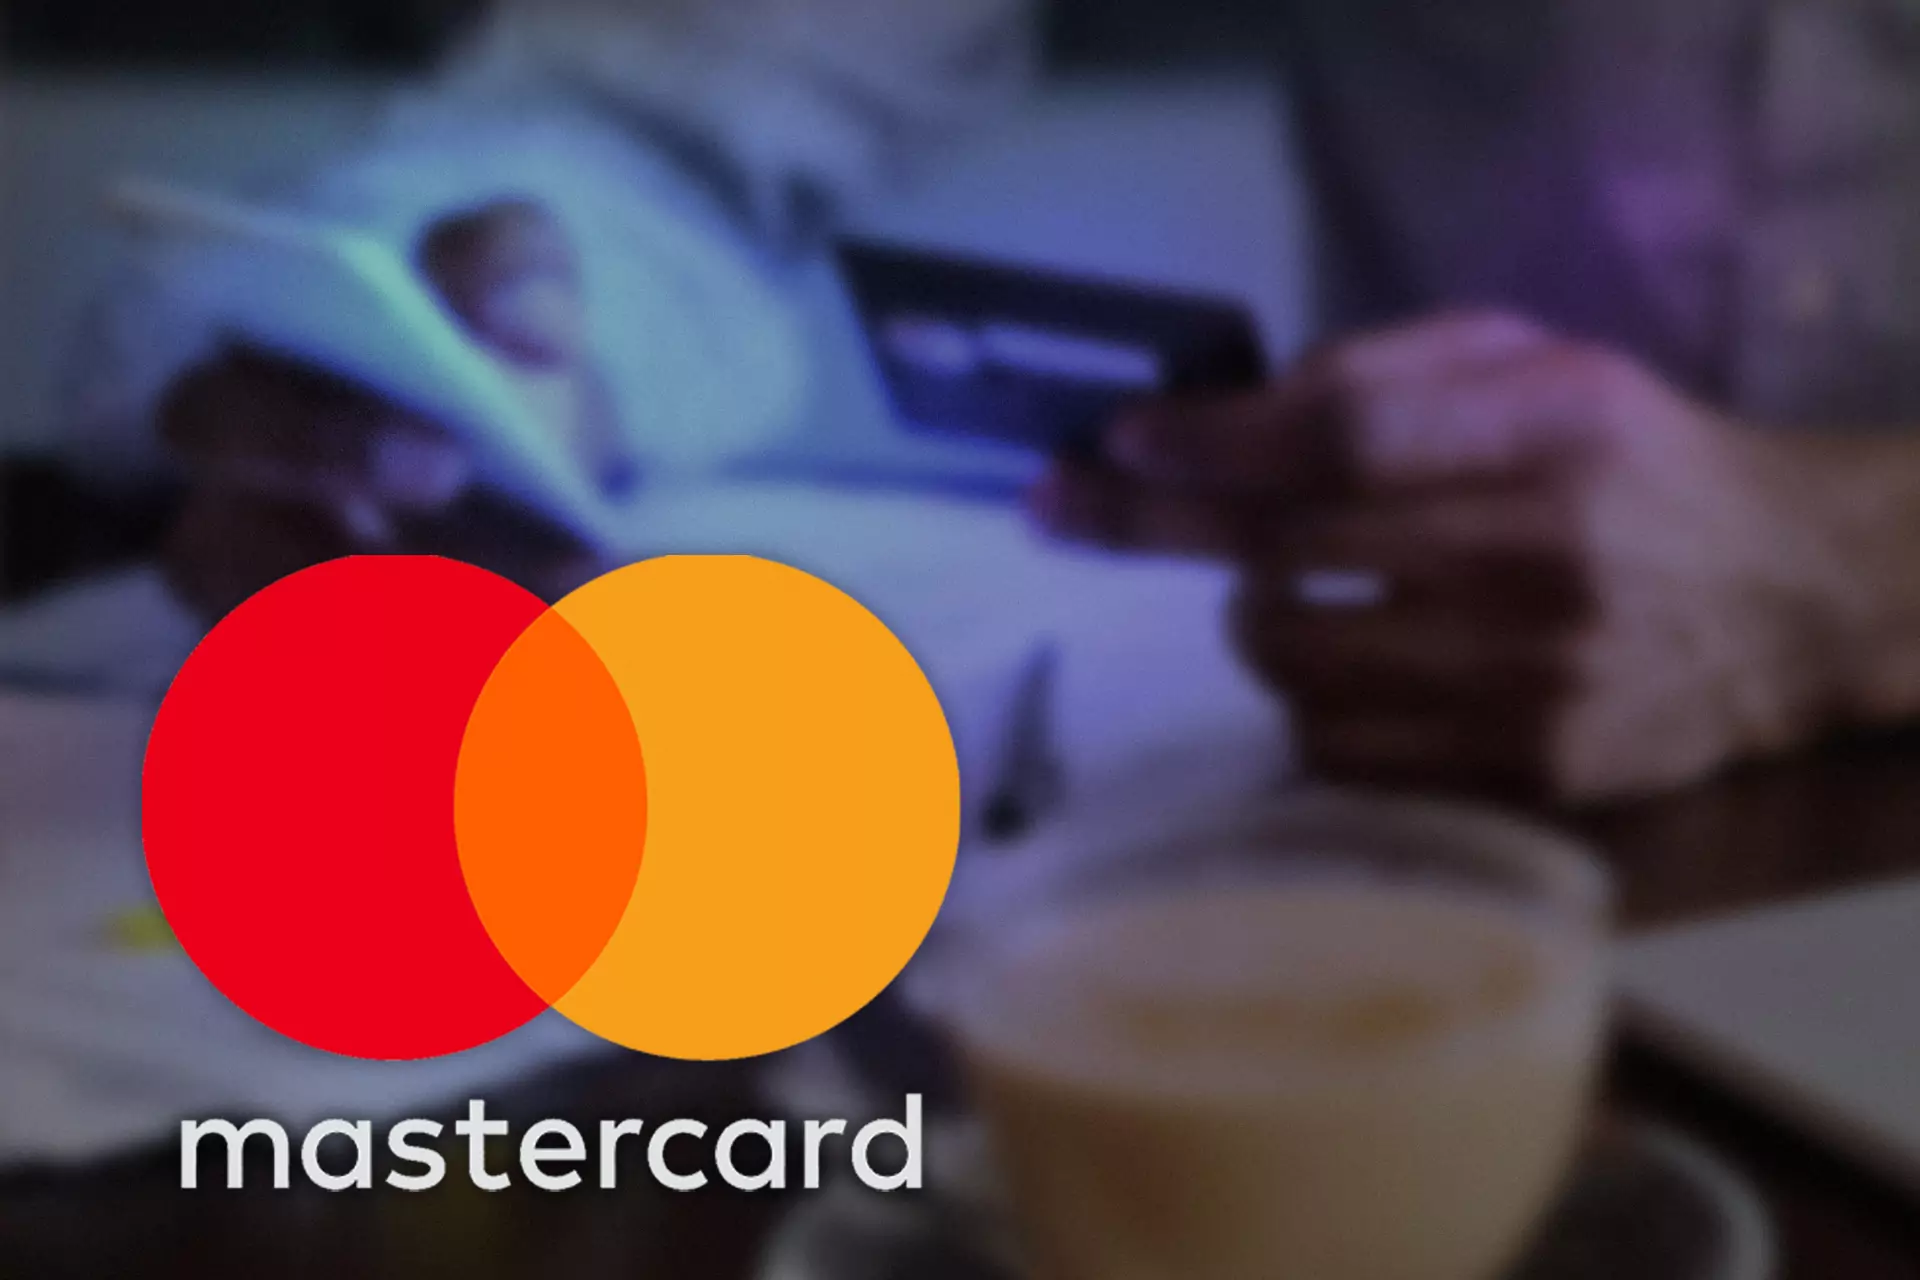 Mastercard is a worldly famous payment system that simplifies transferring money between accounts and banks.